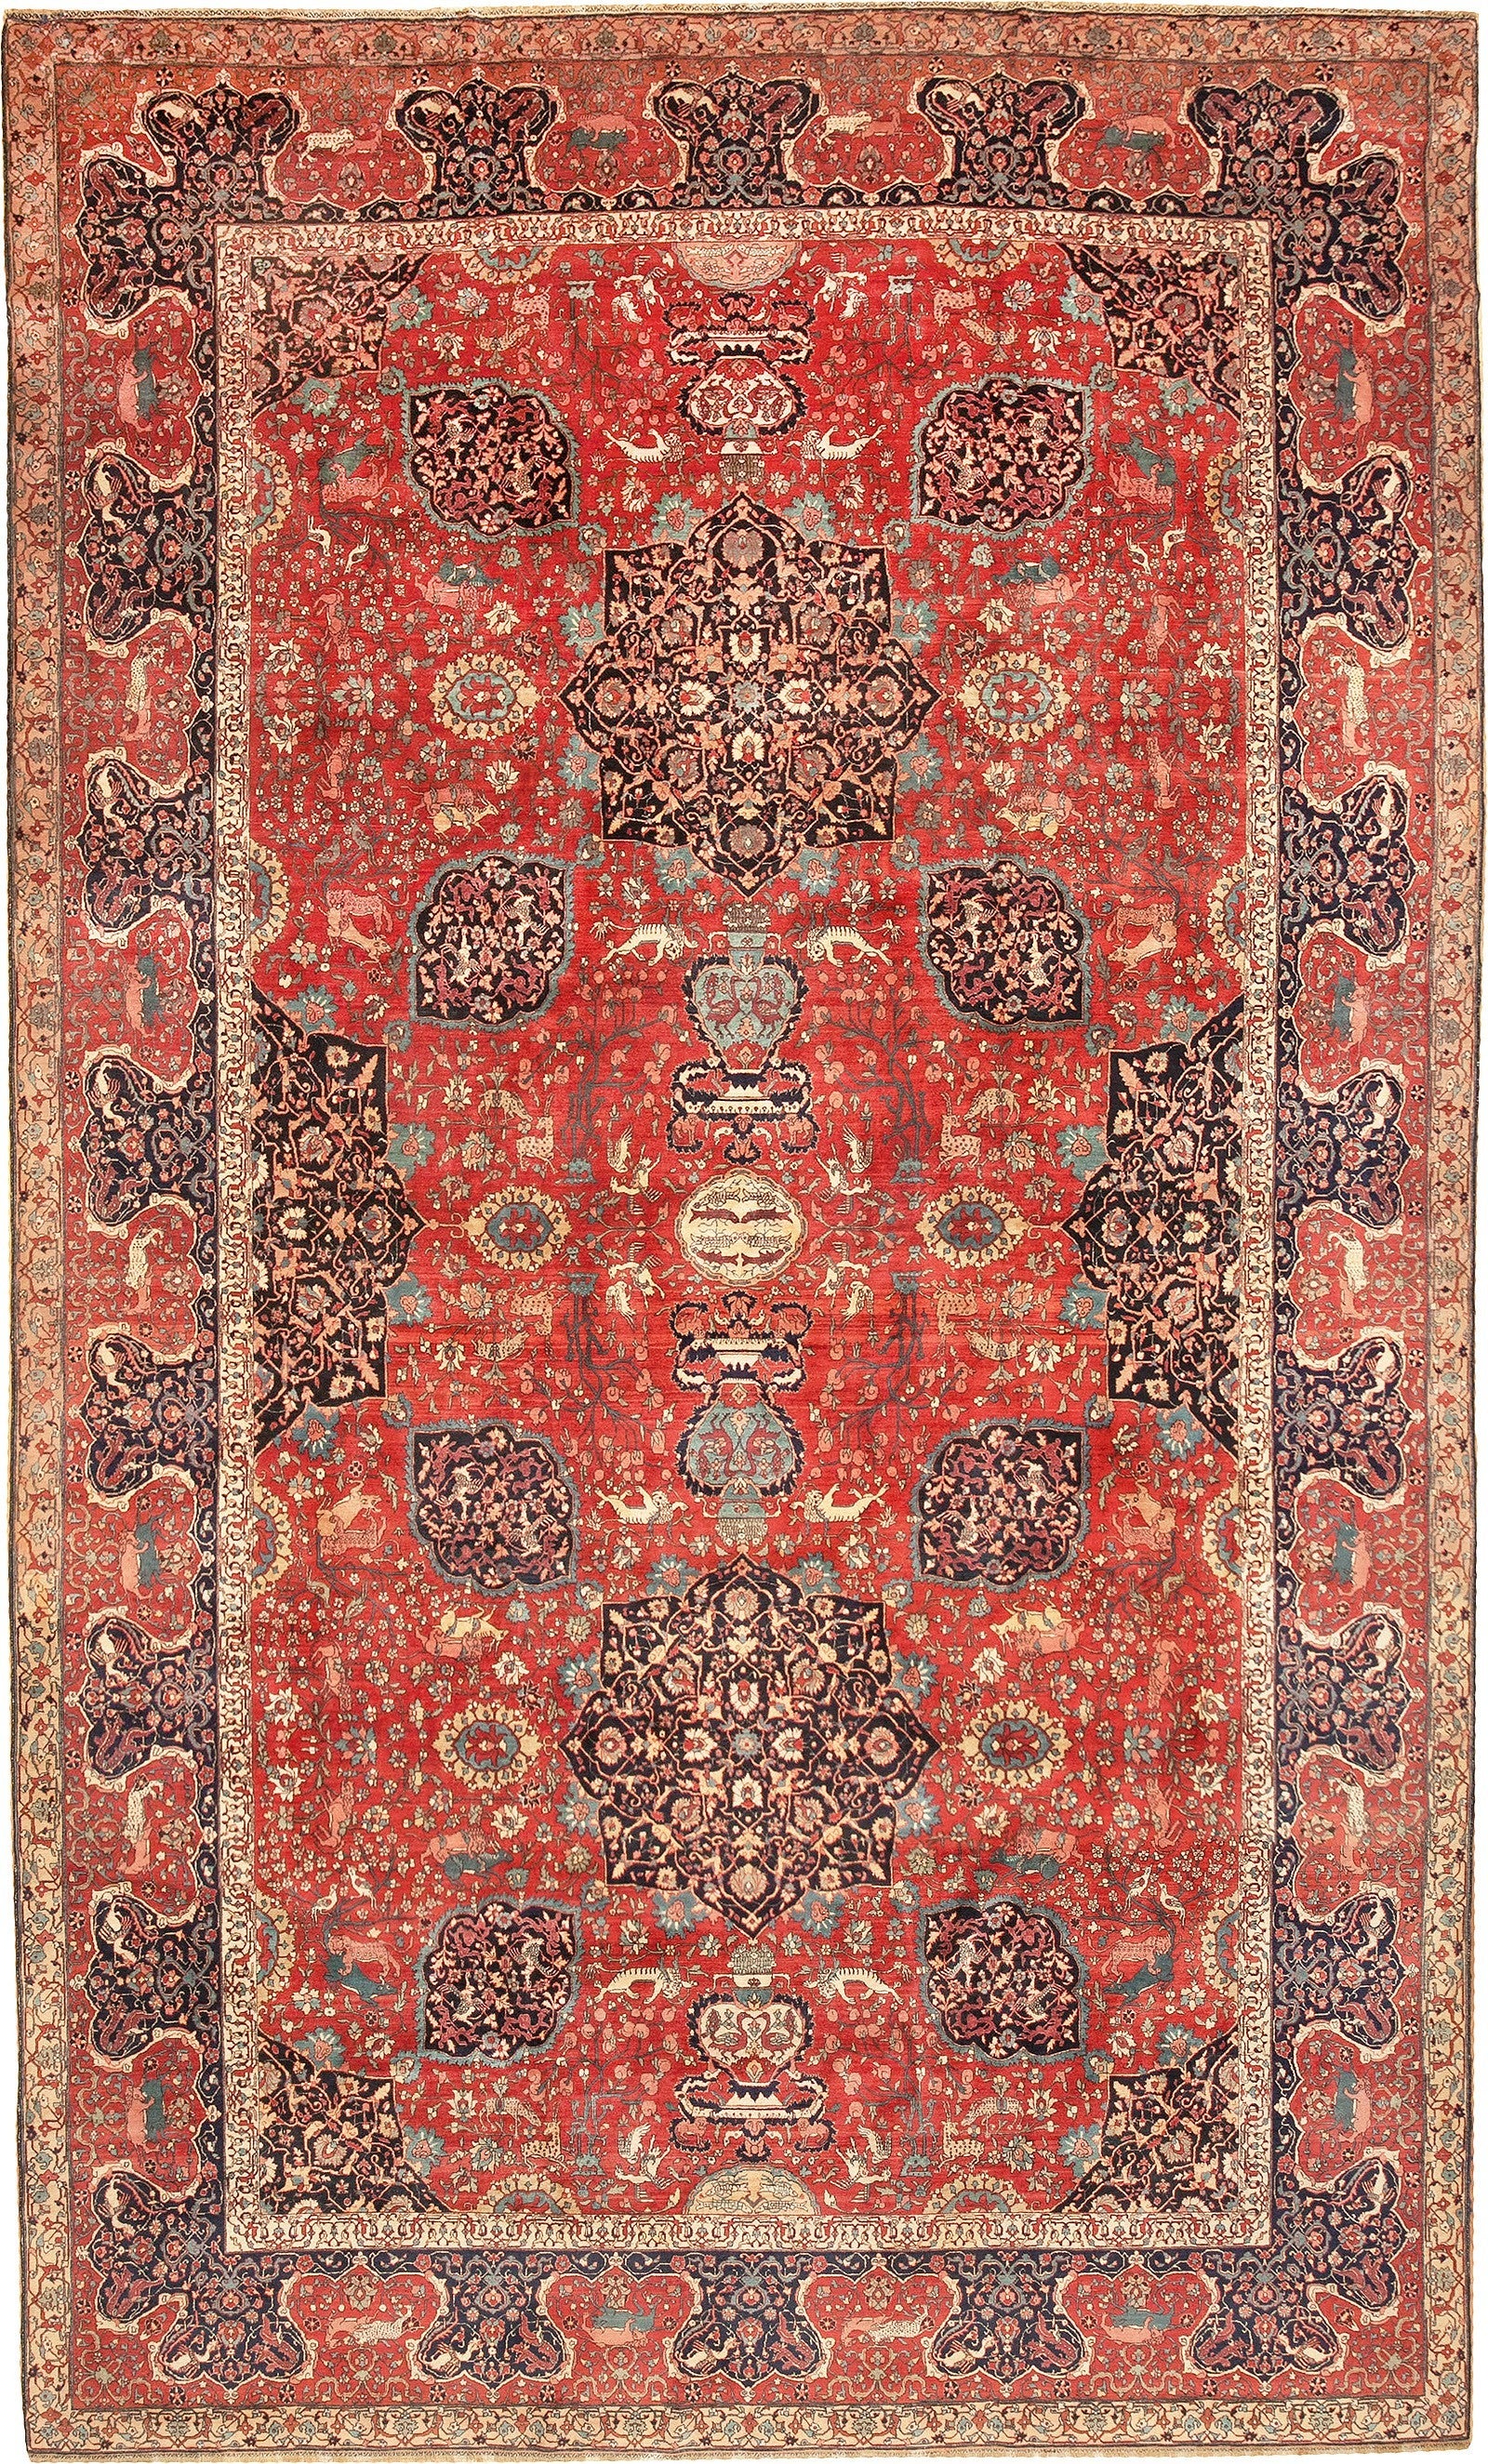 Antique Silk and Wool Indian Agra Rug